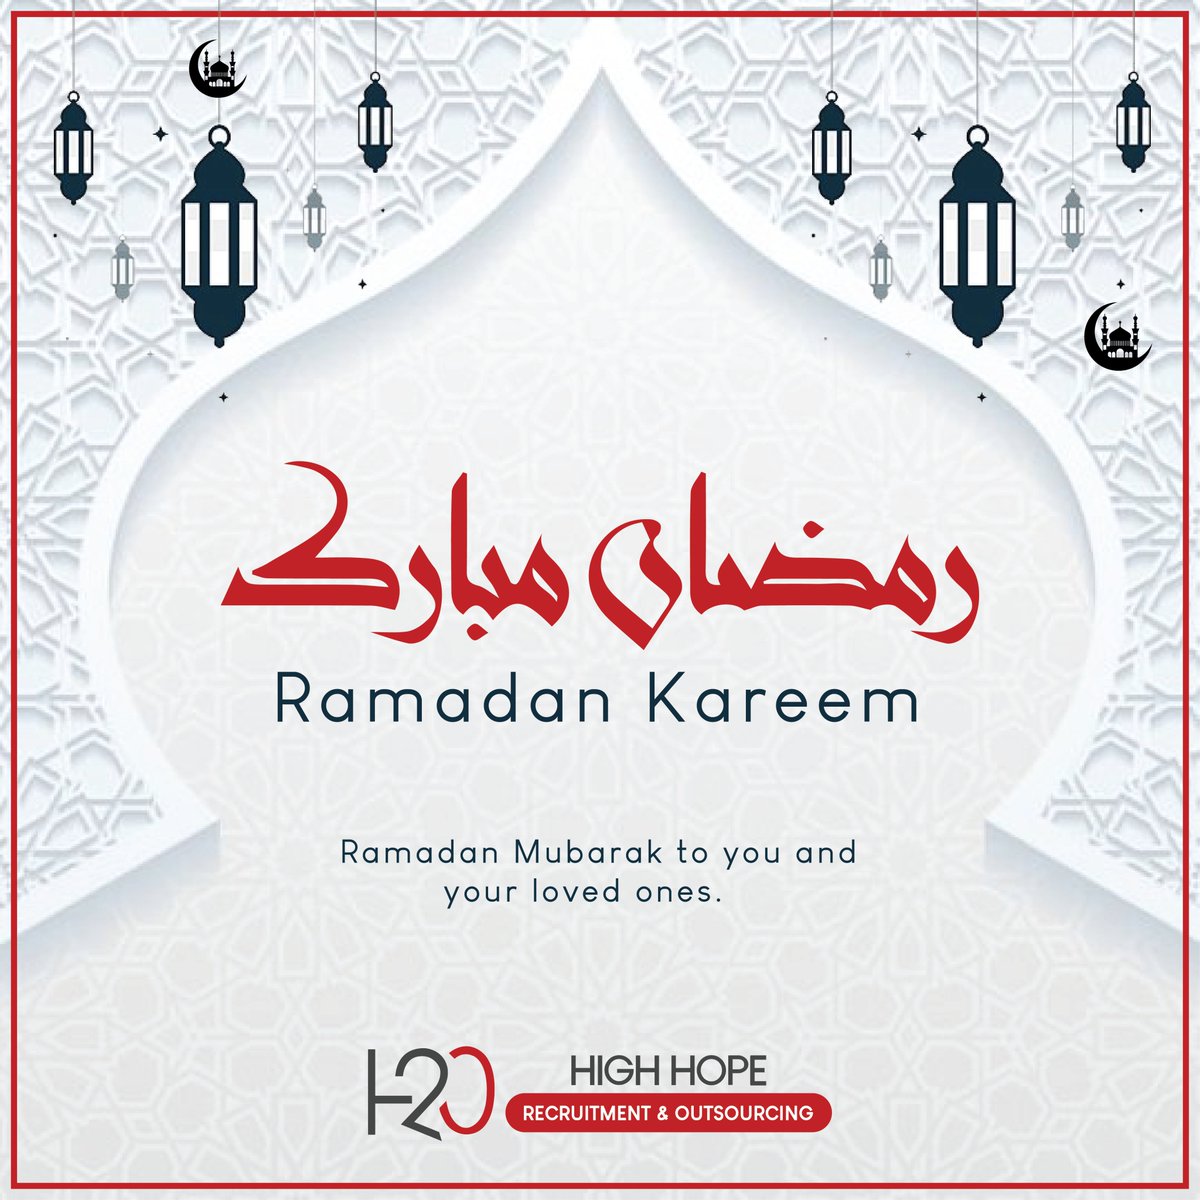 May the holy month of Ramadan be filled with blessings, peace, and joy for you and your loved ones. 𝑹𝒂𝒎𝒂𝒅𝒂𝒏 𝑲𝒂𝒓𝒆𝒆𝒎!
.
.
#RamadanKareem #BlessingsOfRamadan #PeaceAndJoy #Holymonth #Ramadan2024 #IslamicBlessings #Spirituality #Community #Fasting #Reflection #gratitude